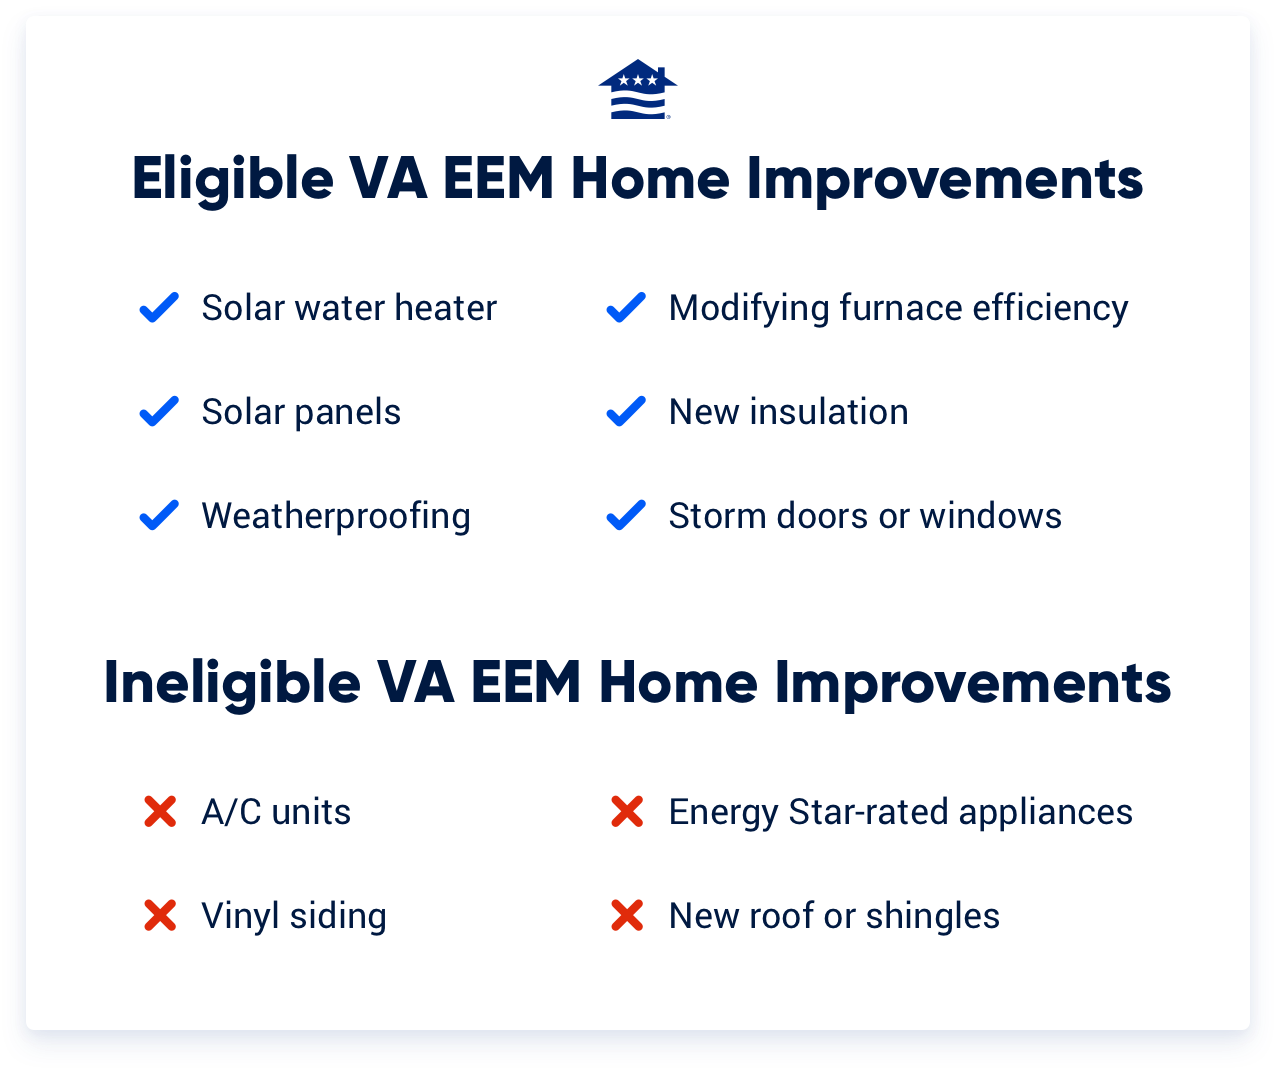 A list of eligible and ineligible energy efficient home loan improvements.